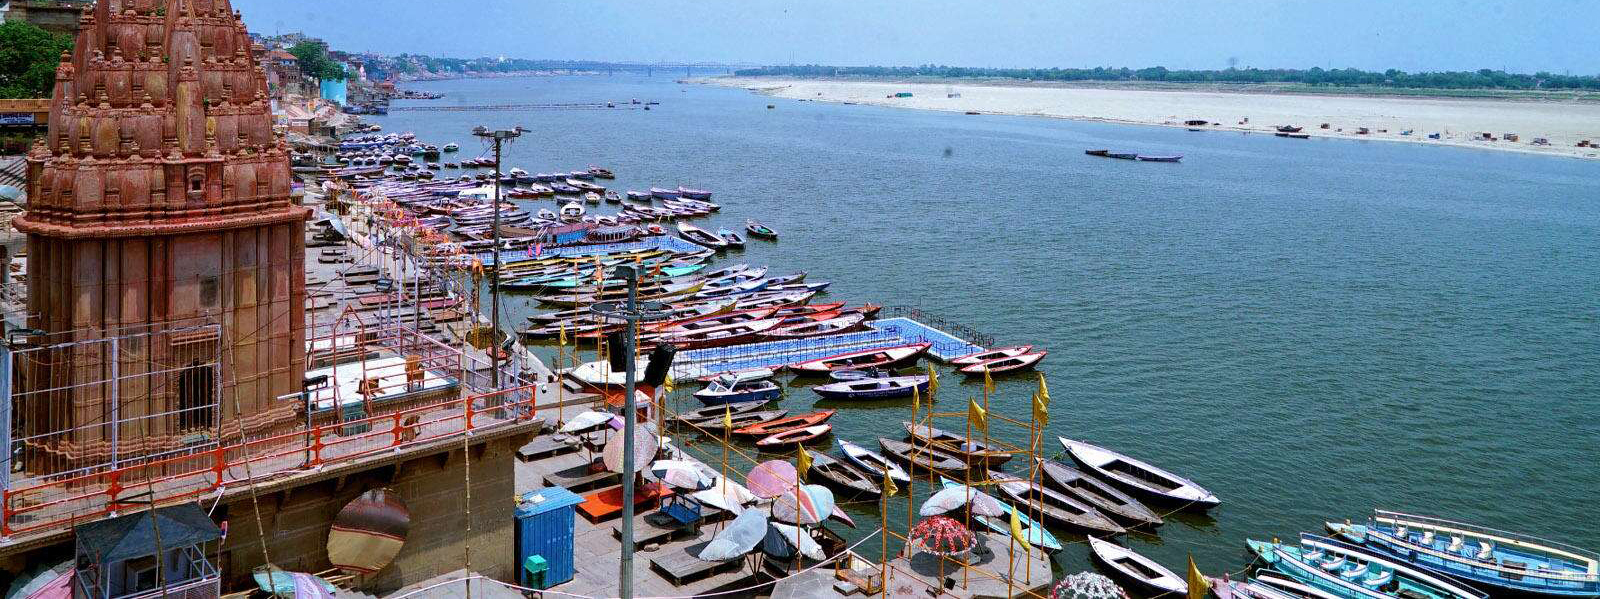 How lockdown has been a gift for river ganga in varanasi